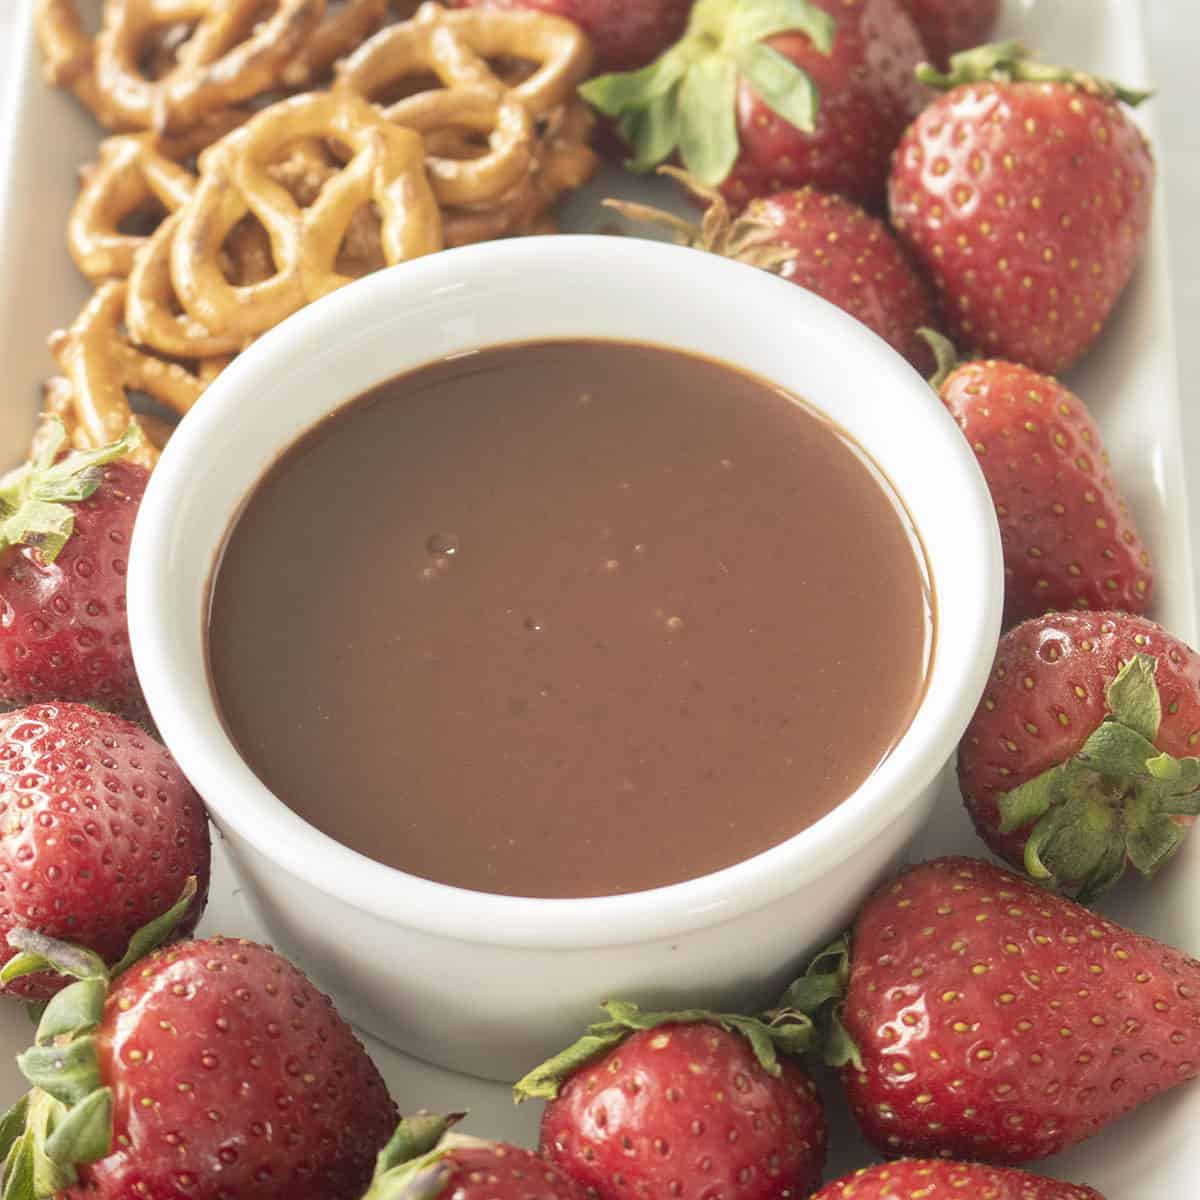 Chocolate dipping sauce in a white bowl with strawberries and pretzels.